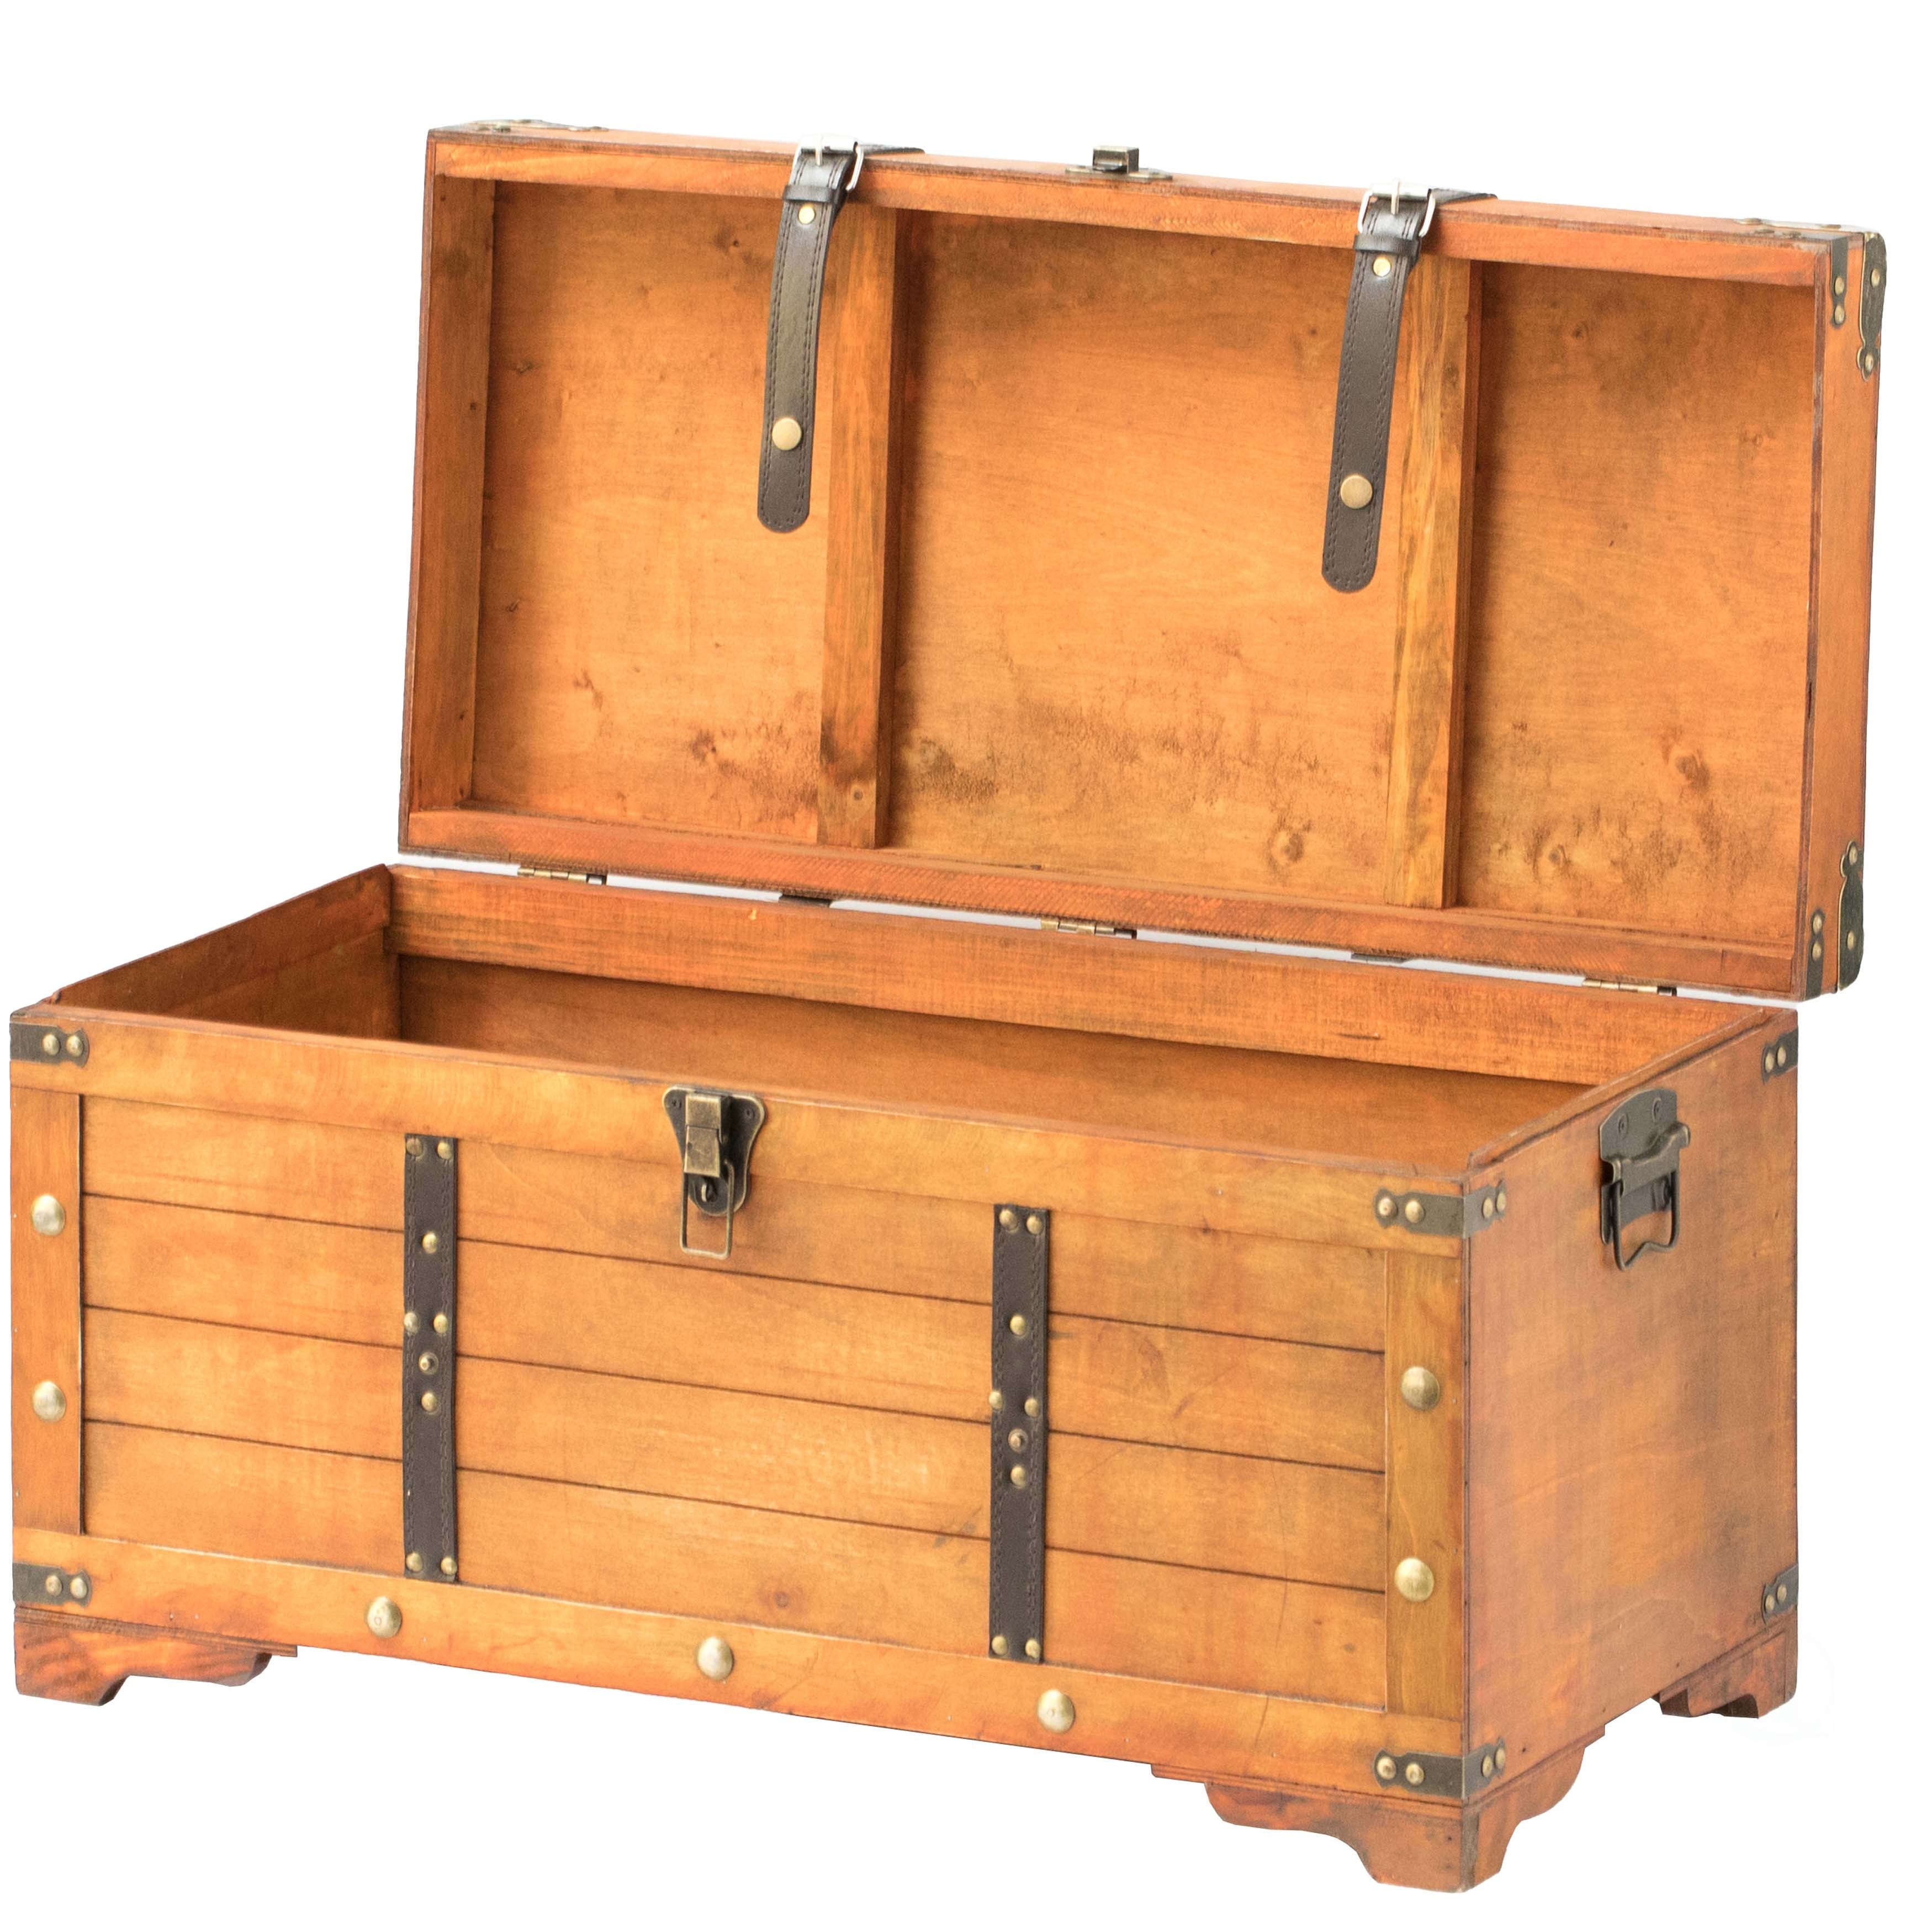 https://ak1.ostkcdn.com/images/products/is/images/direct/41c8bbea8d145b8c93375d79e7a302b35680dd97/Rustic-Large-Wooden-Storage-Trunk-with-Lockable-Latch.jpg